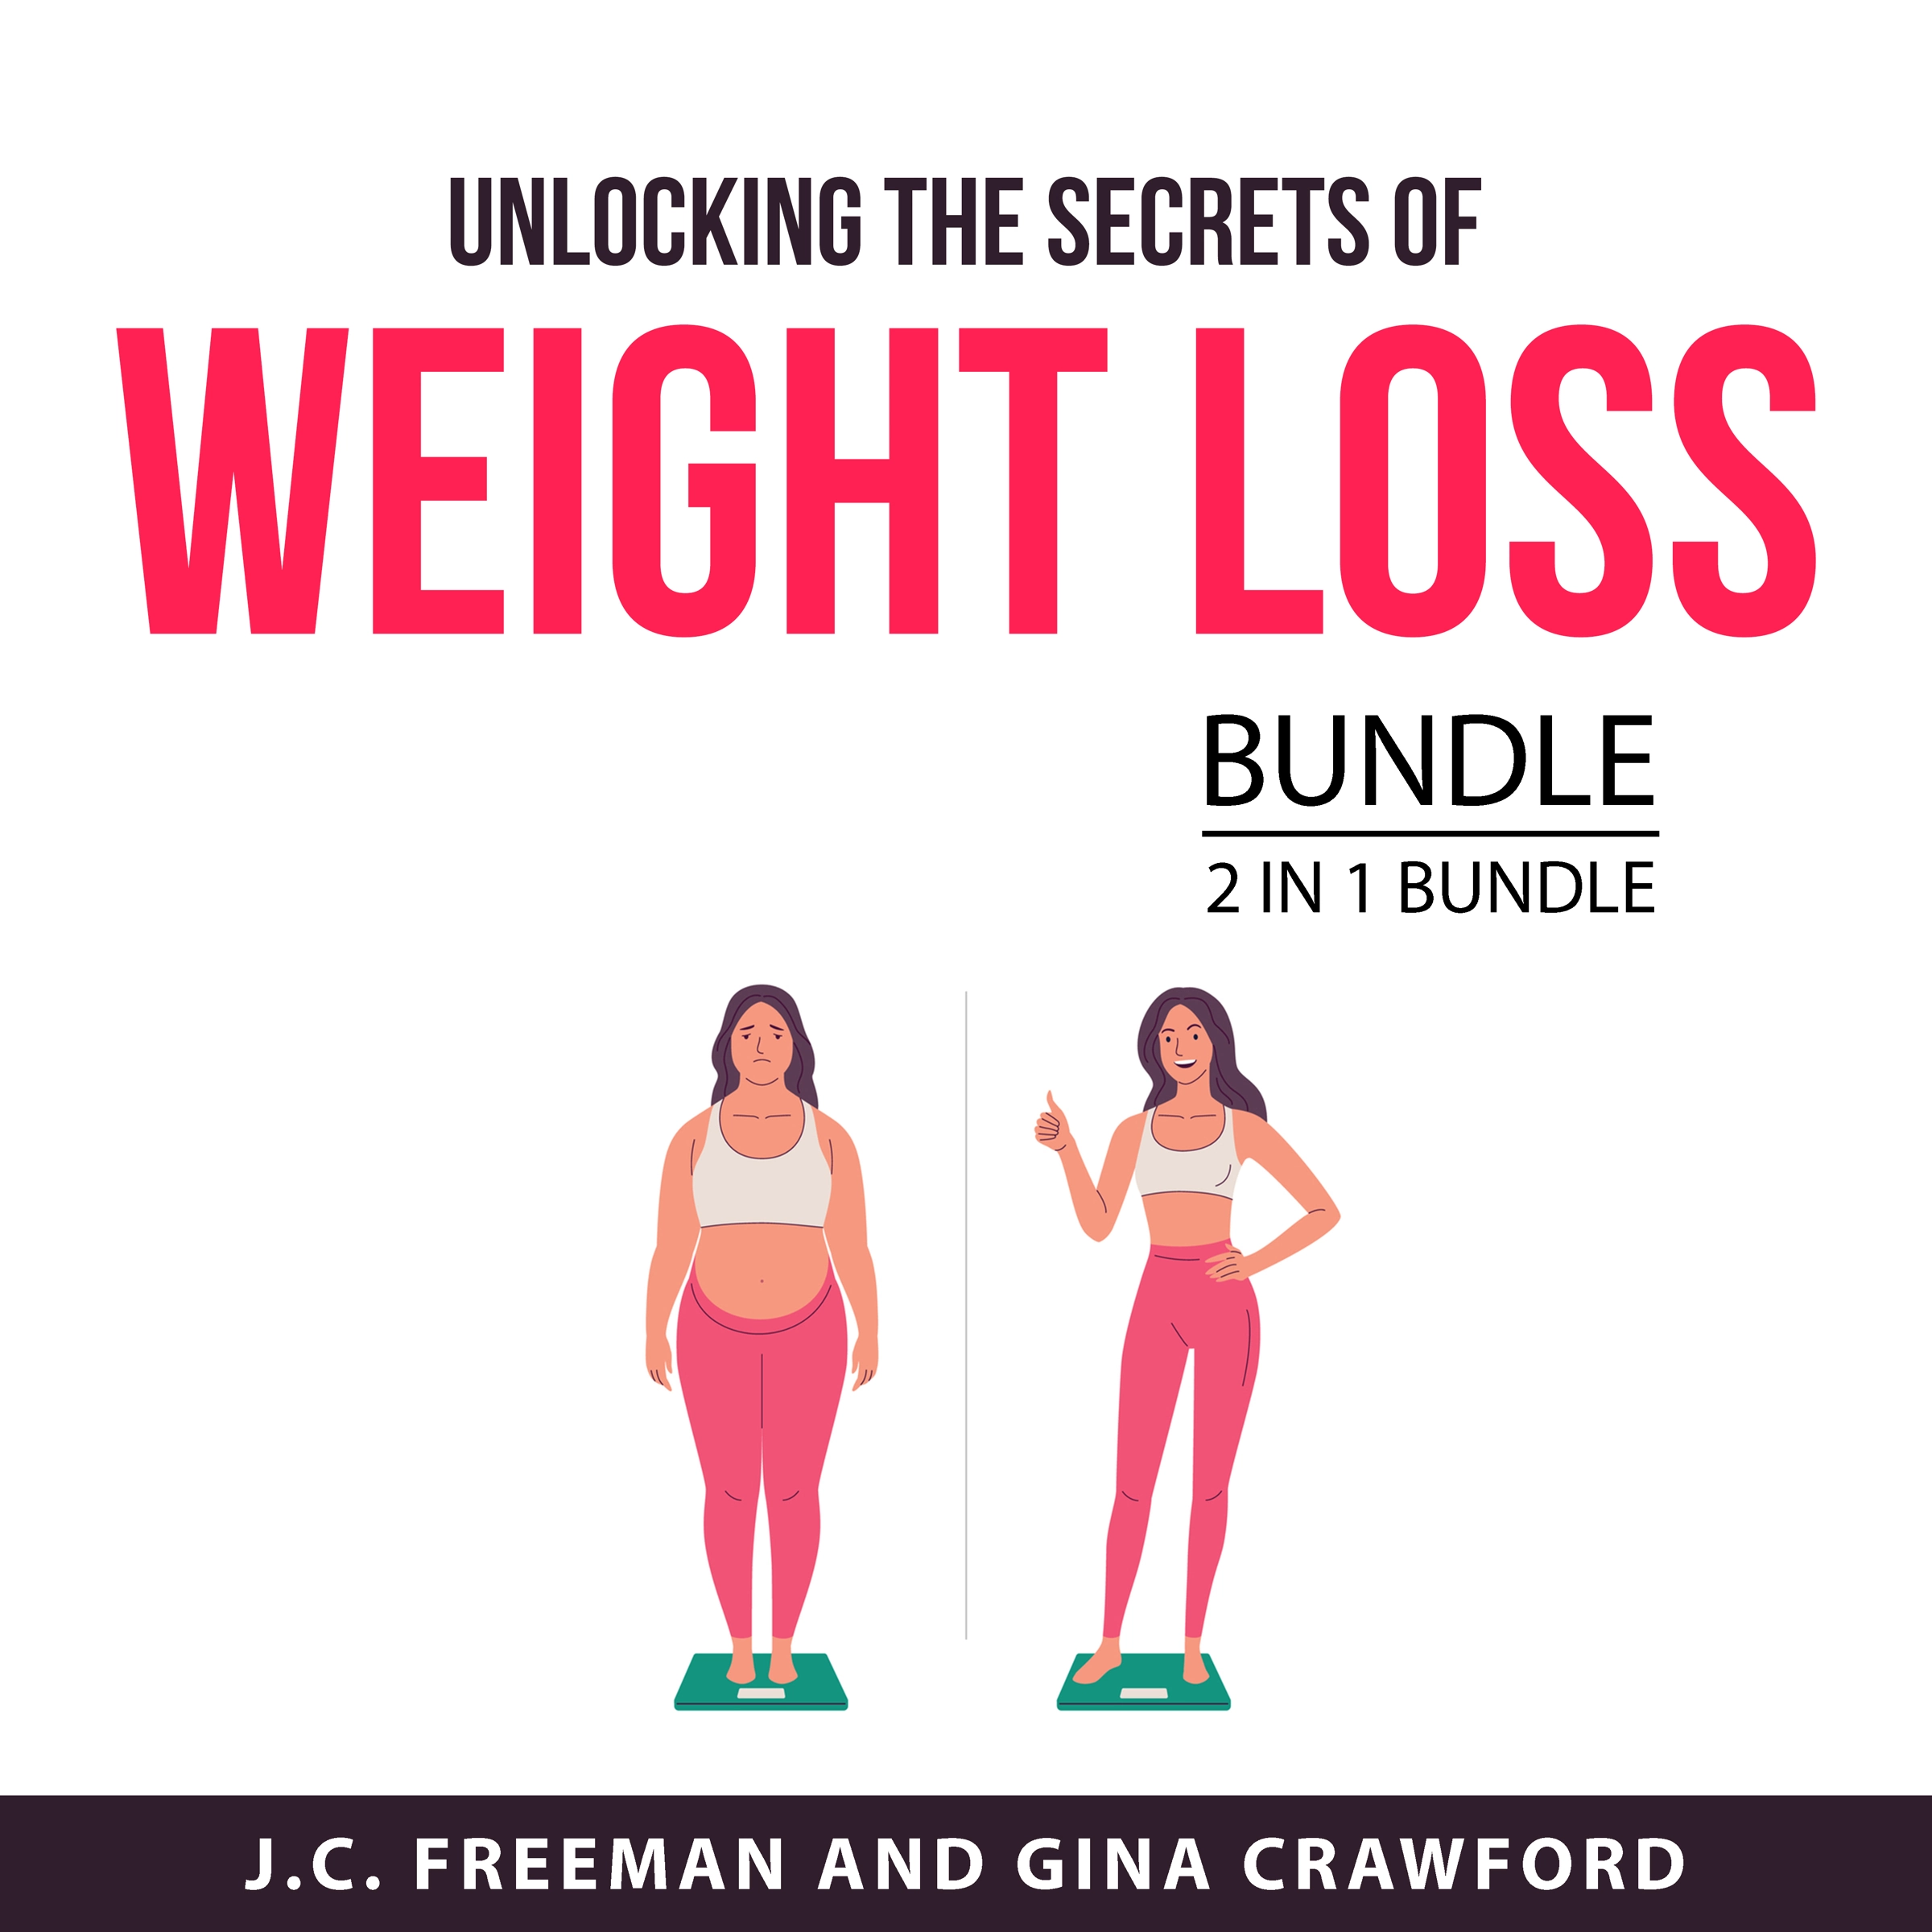 Unlocking the Secrets of Weight Loss Bundle, 2 in 1 Bundle Audiobook by Gina Crawford